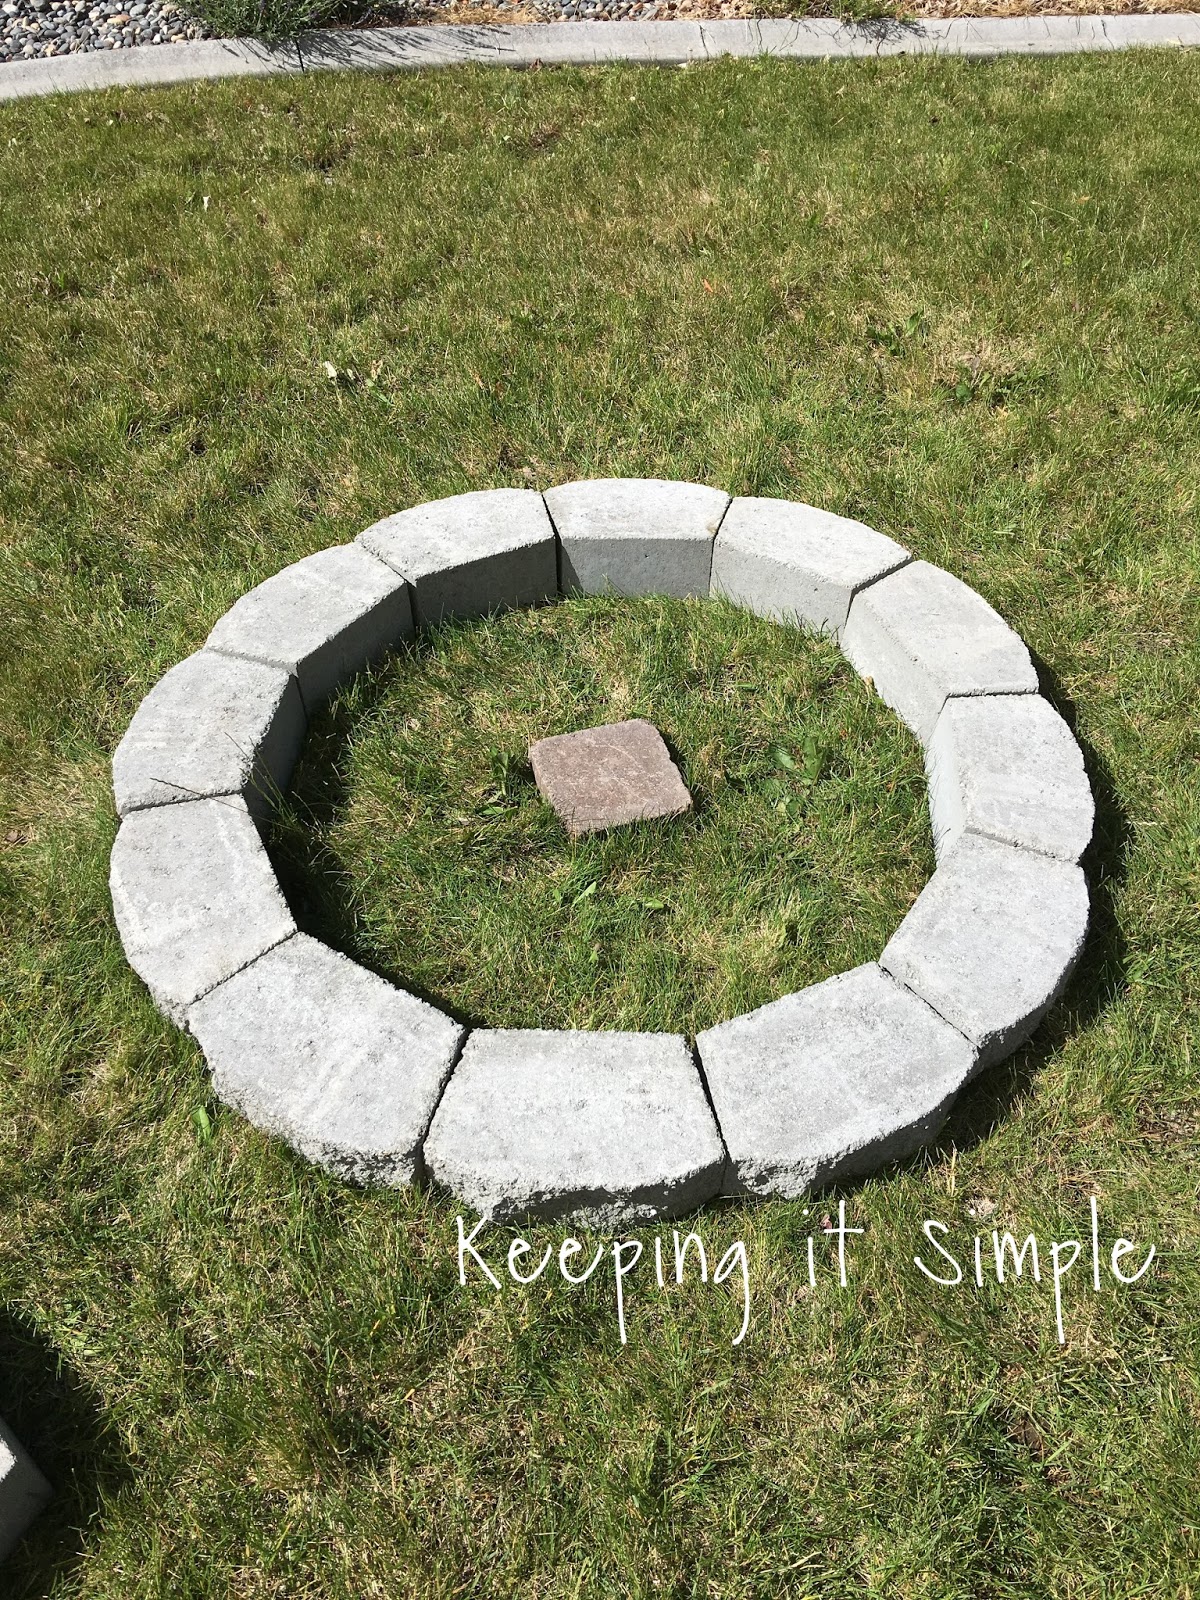 Build A Diy Fire Pit For Only 60, How To Put Pavers Around A Round Fire Pit